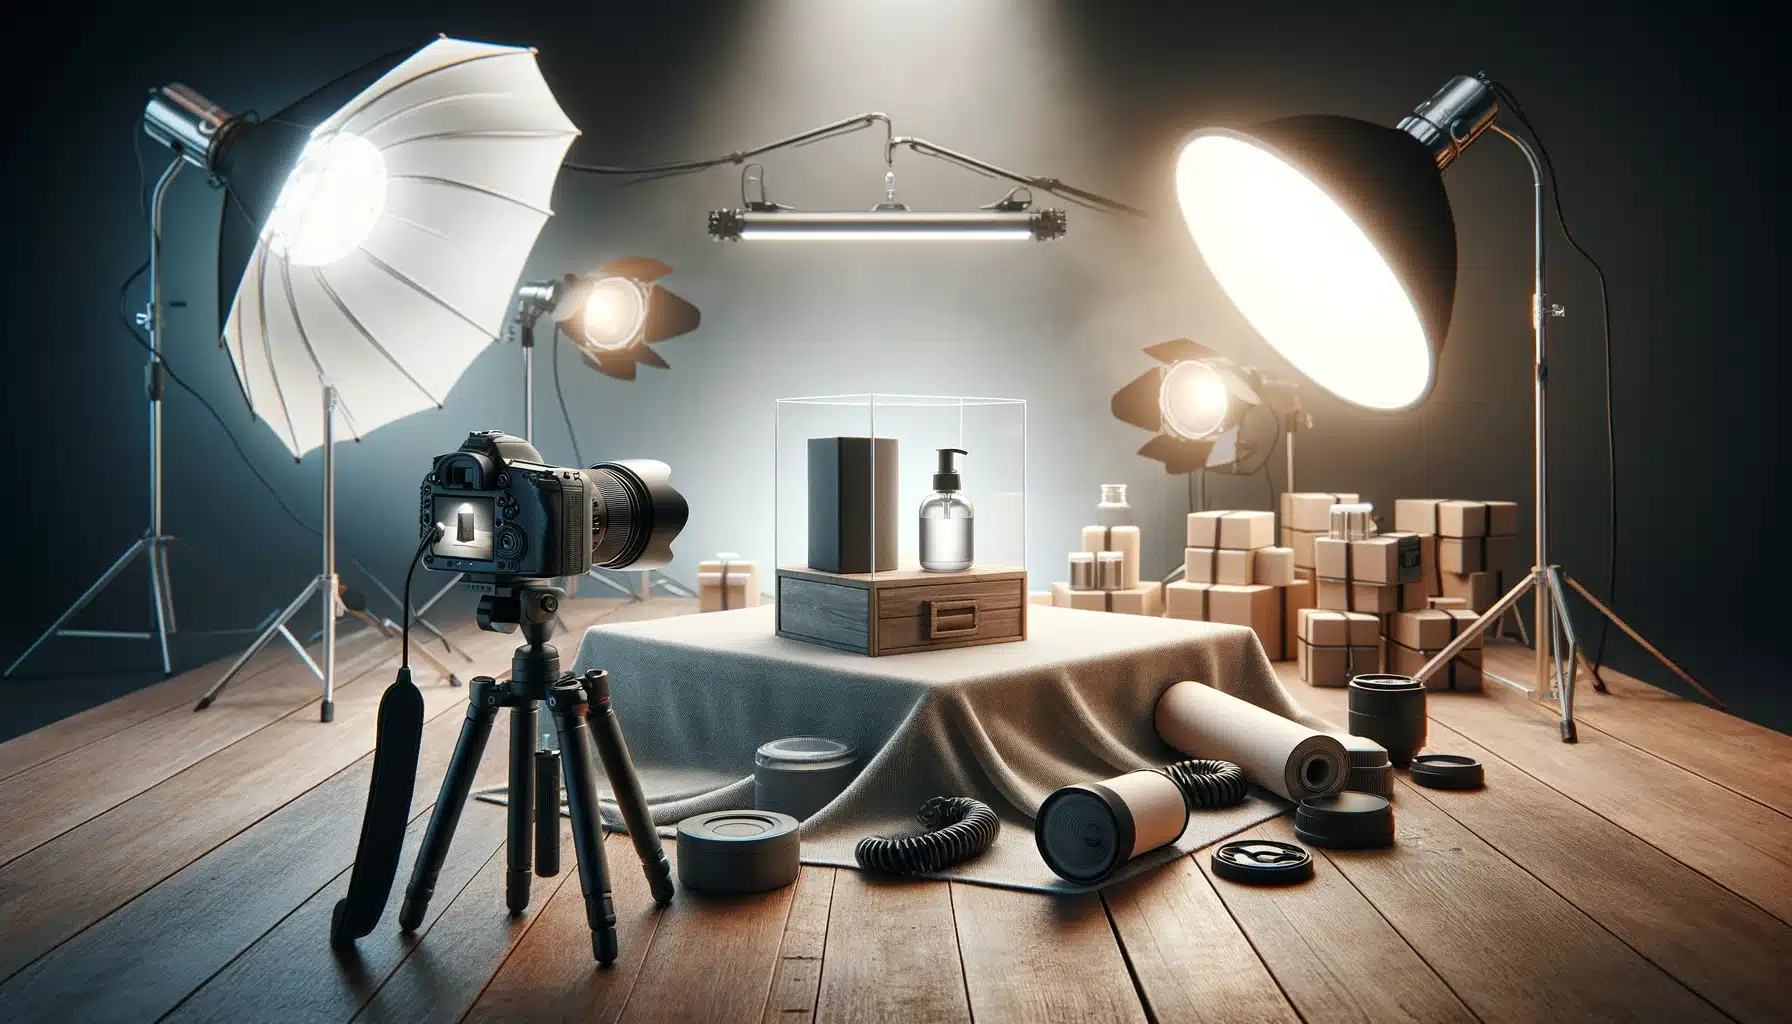 Professional product photography setup with a highlighted product on a table, surrounded by cameras and lighting equipment, showcasing a precision environment.